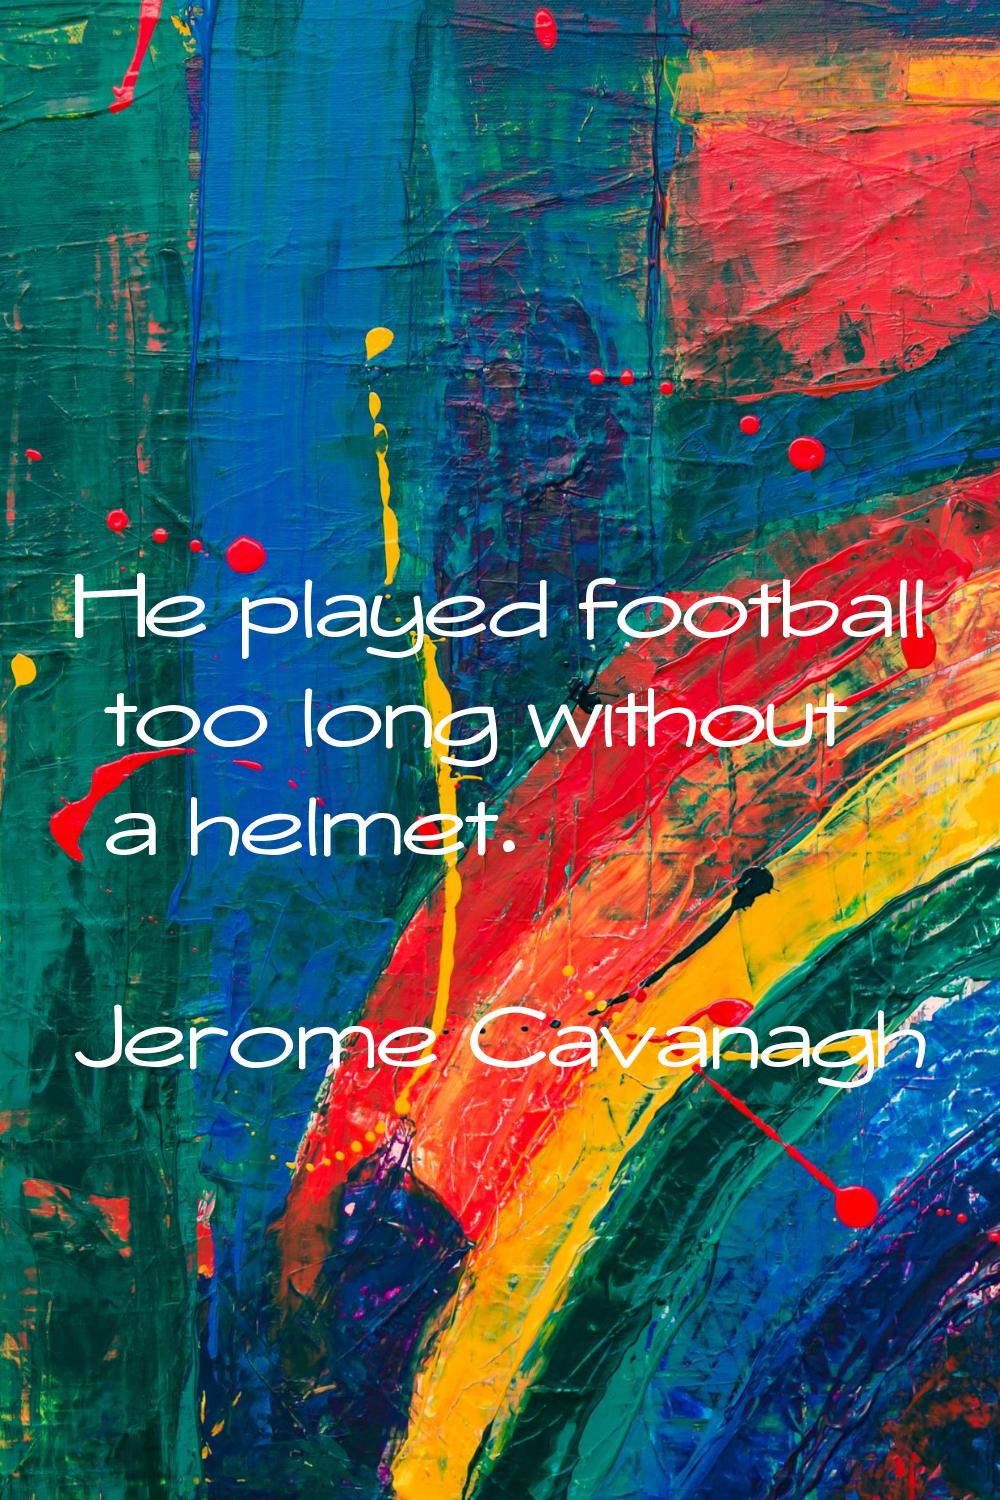 He played football too long without a helmet.